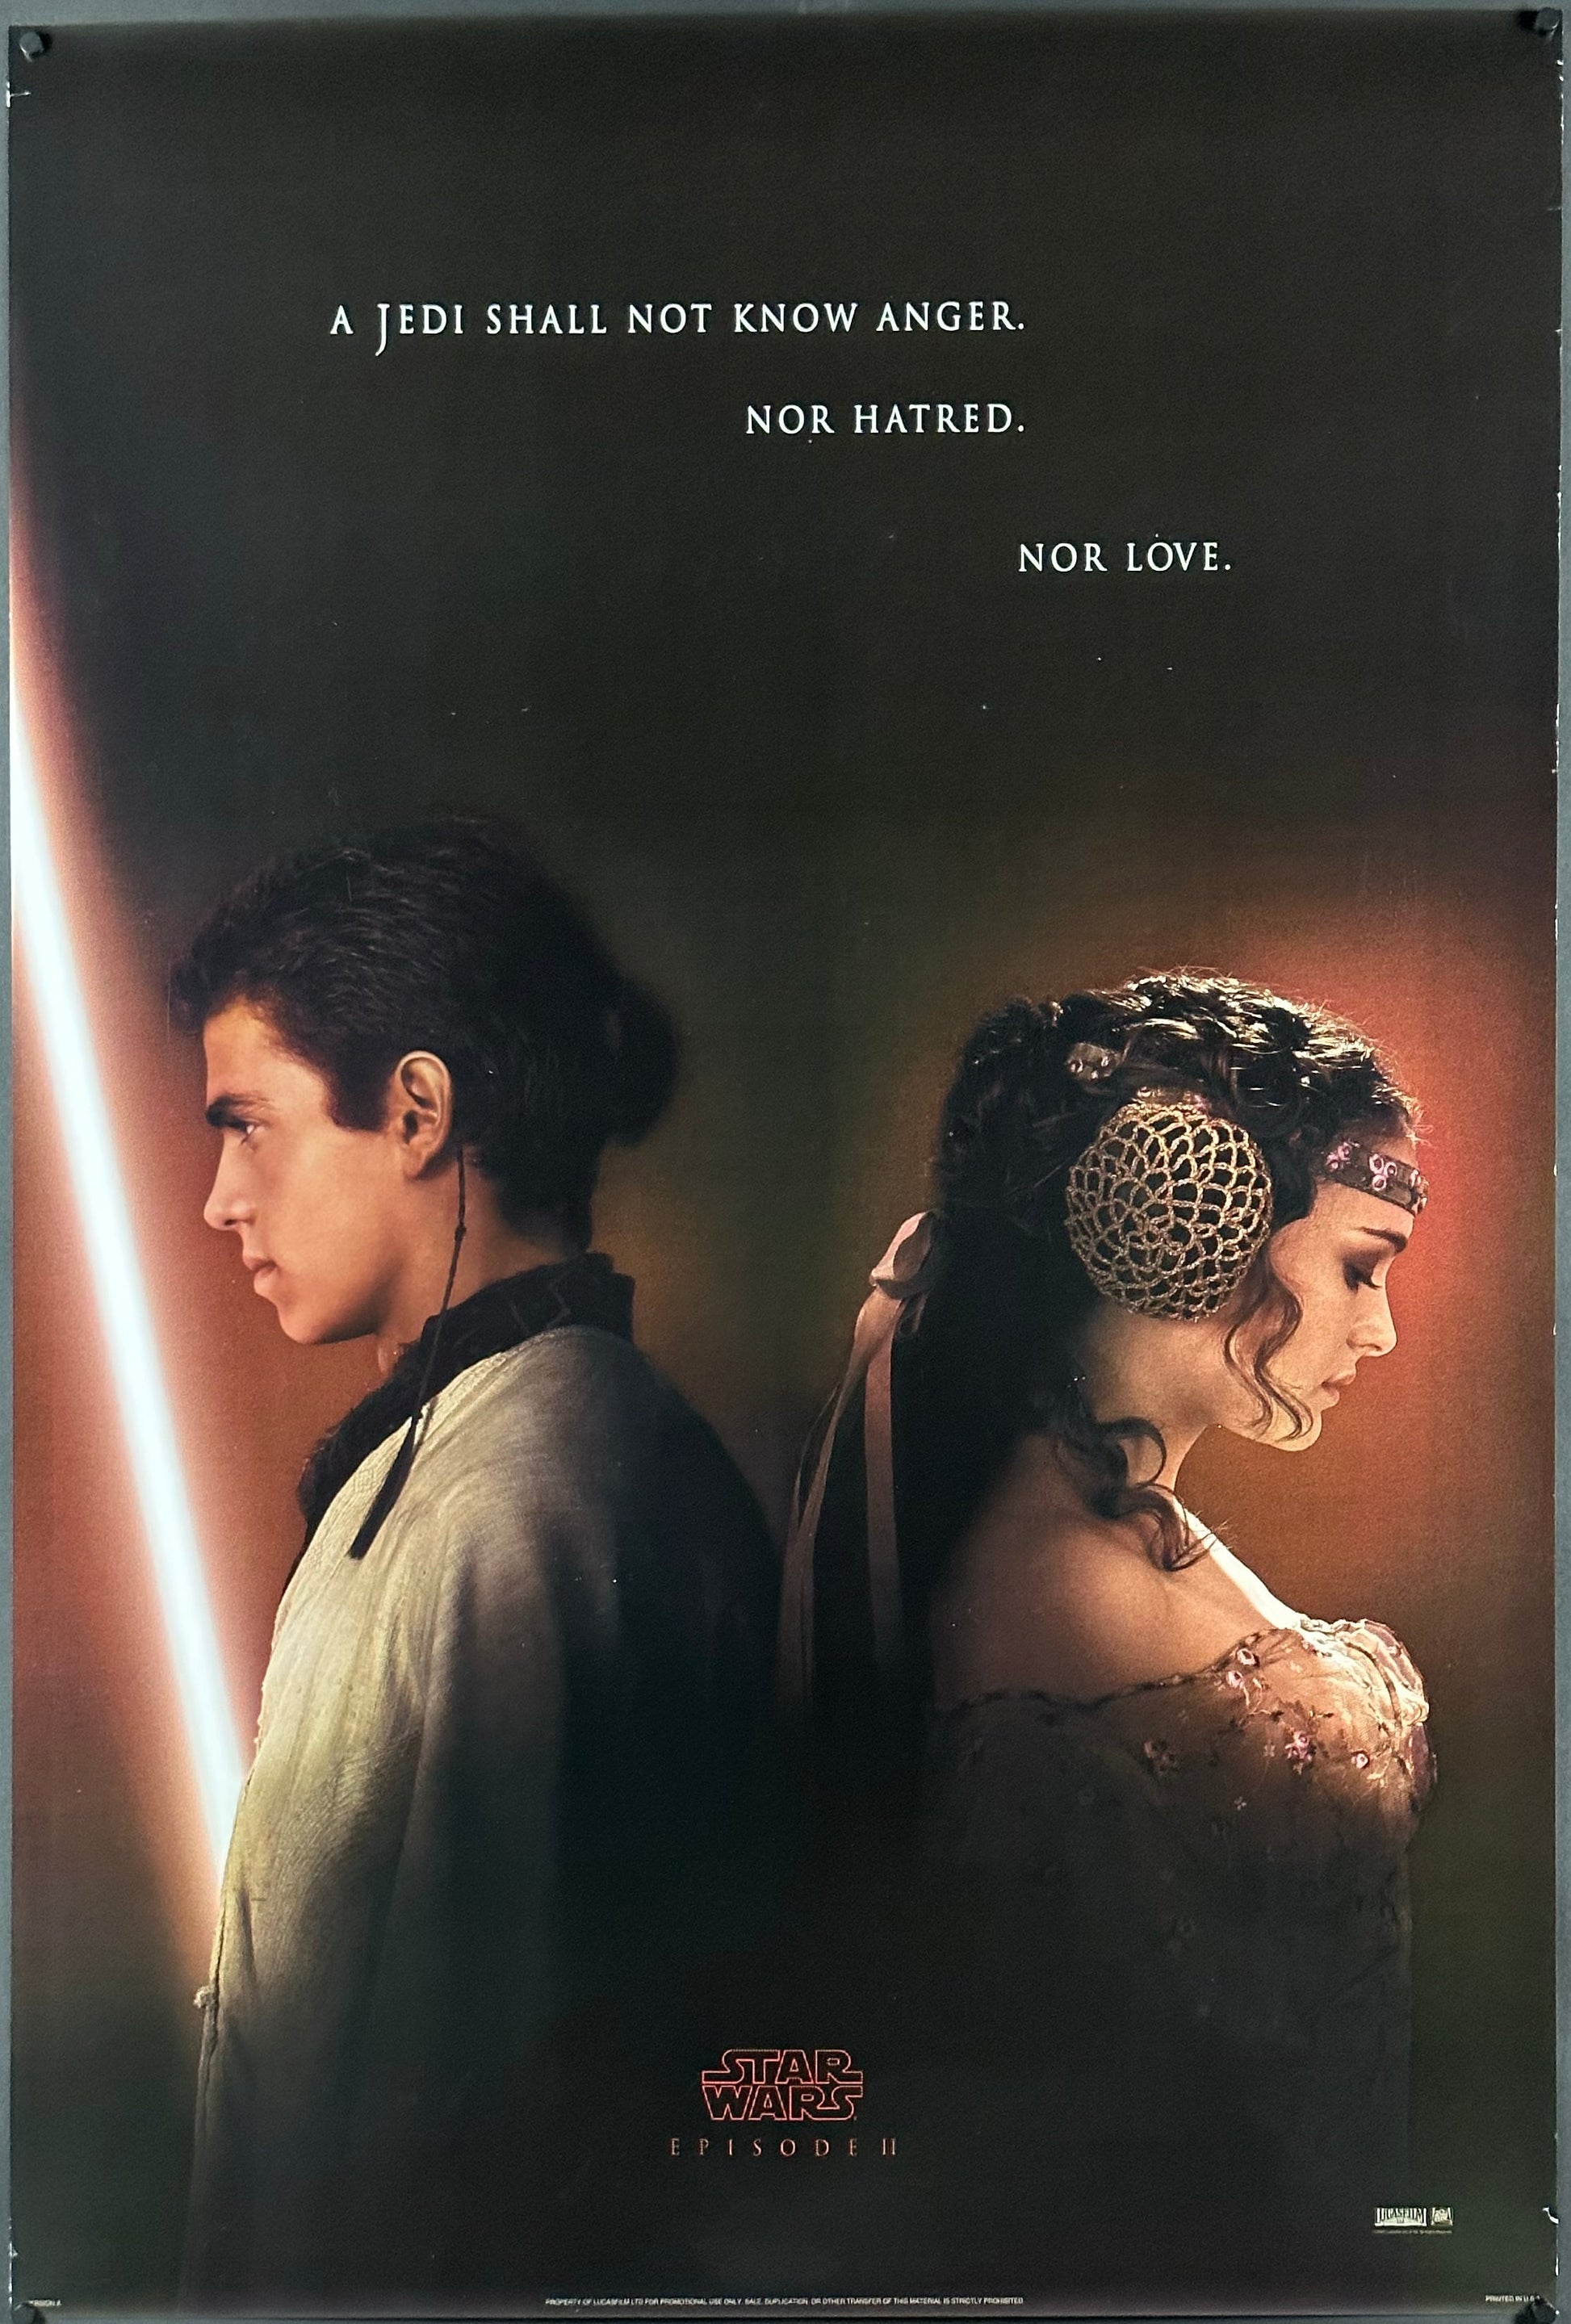 Star Wars: Episode II - Attack of the Clones US One Sheet Teaser Style (2002) - ORIGINAL RELEASE - posterpalace.com